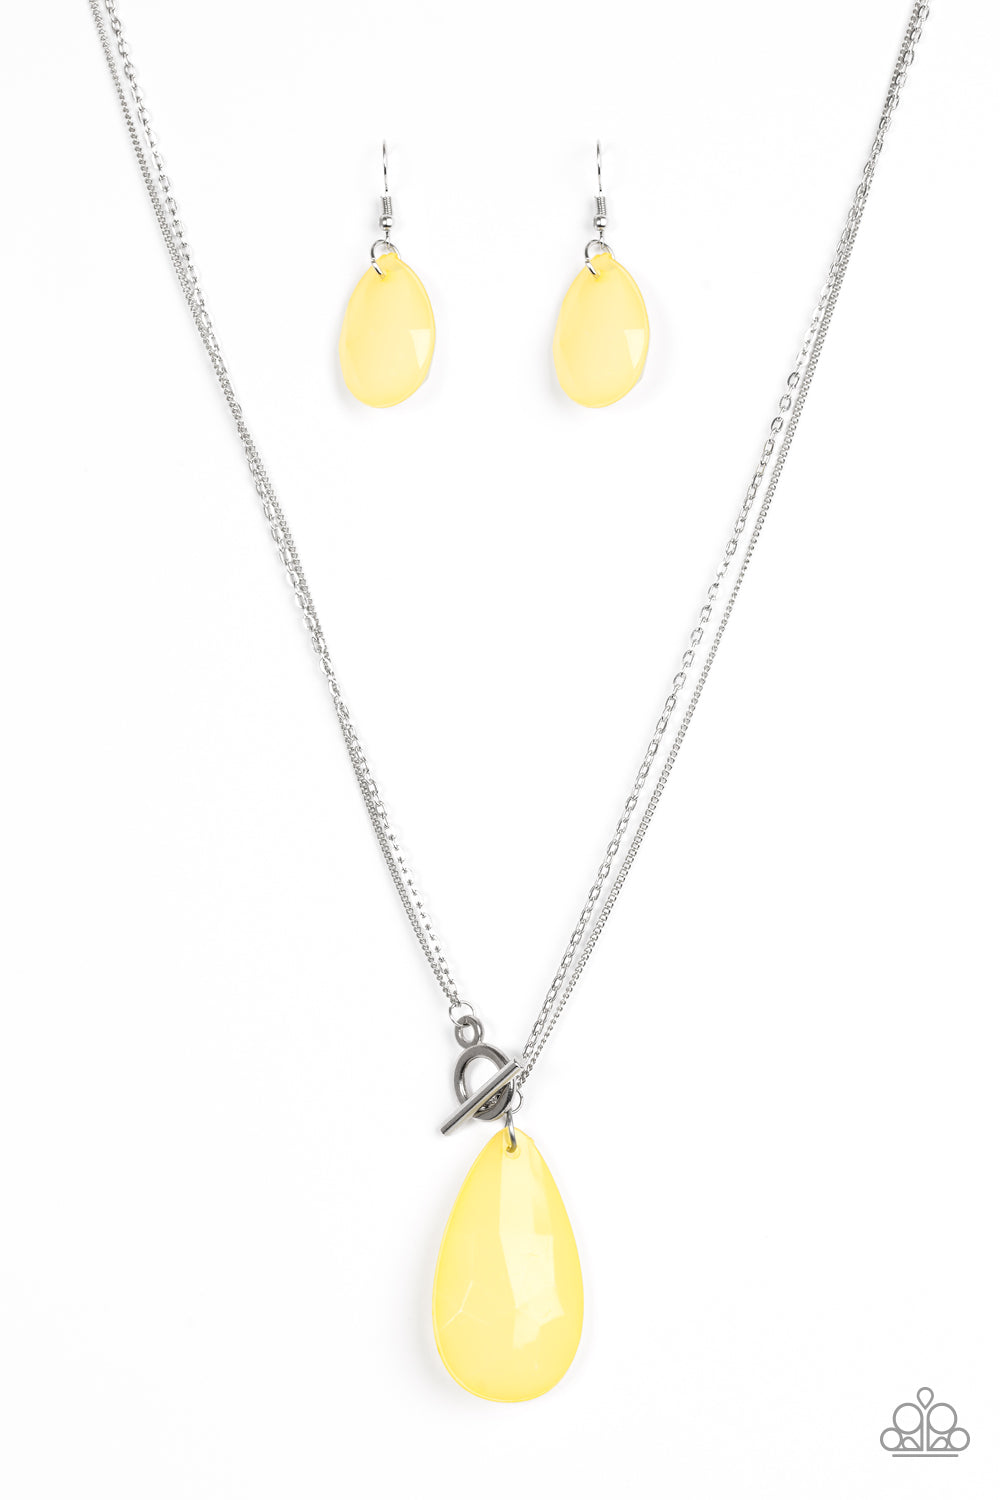 spring-storm-yellow Necklace - TheMasterCollection